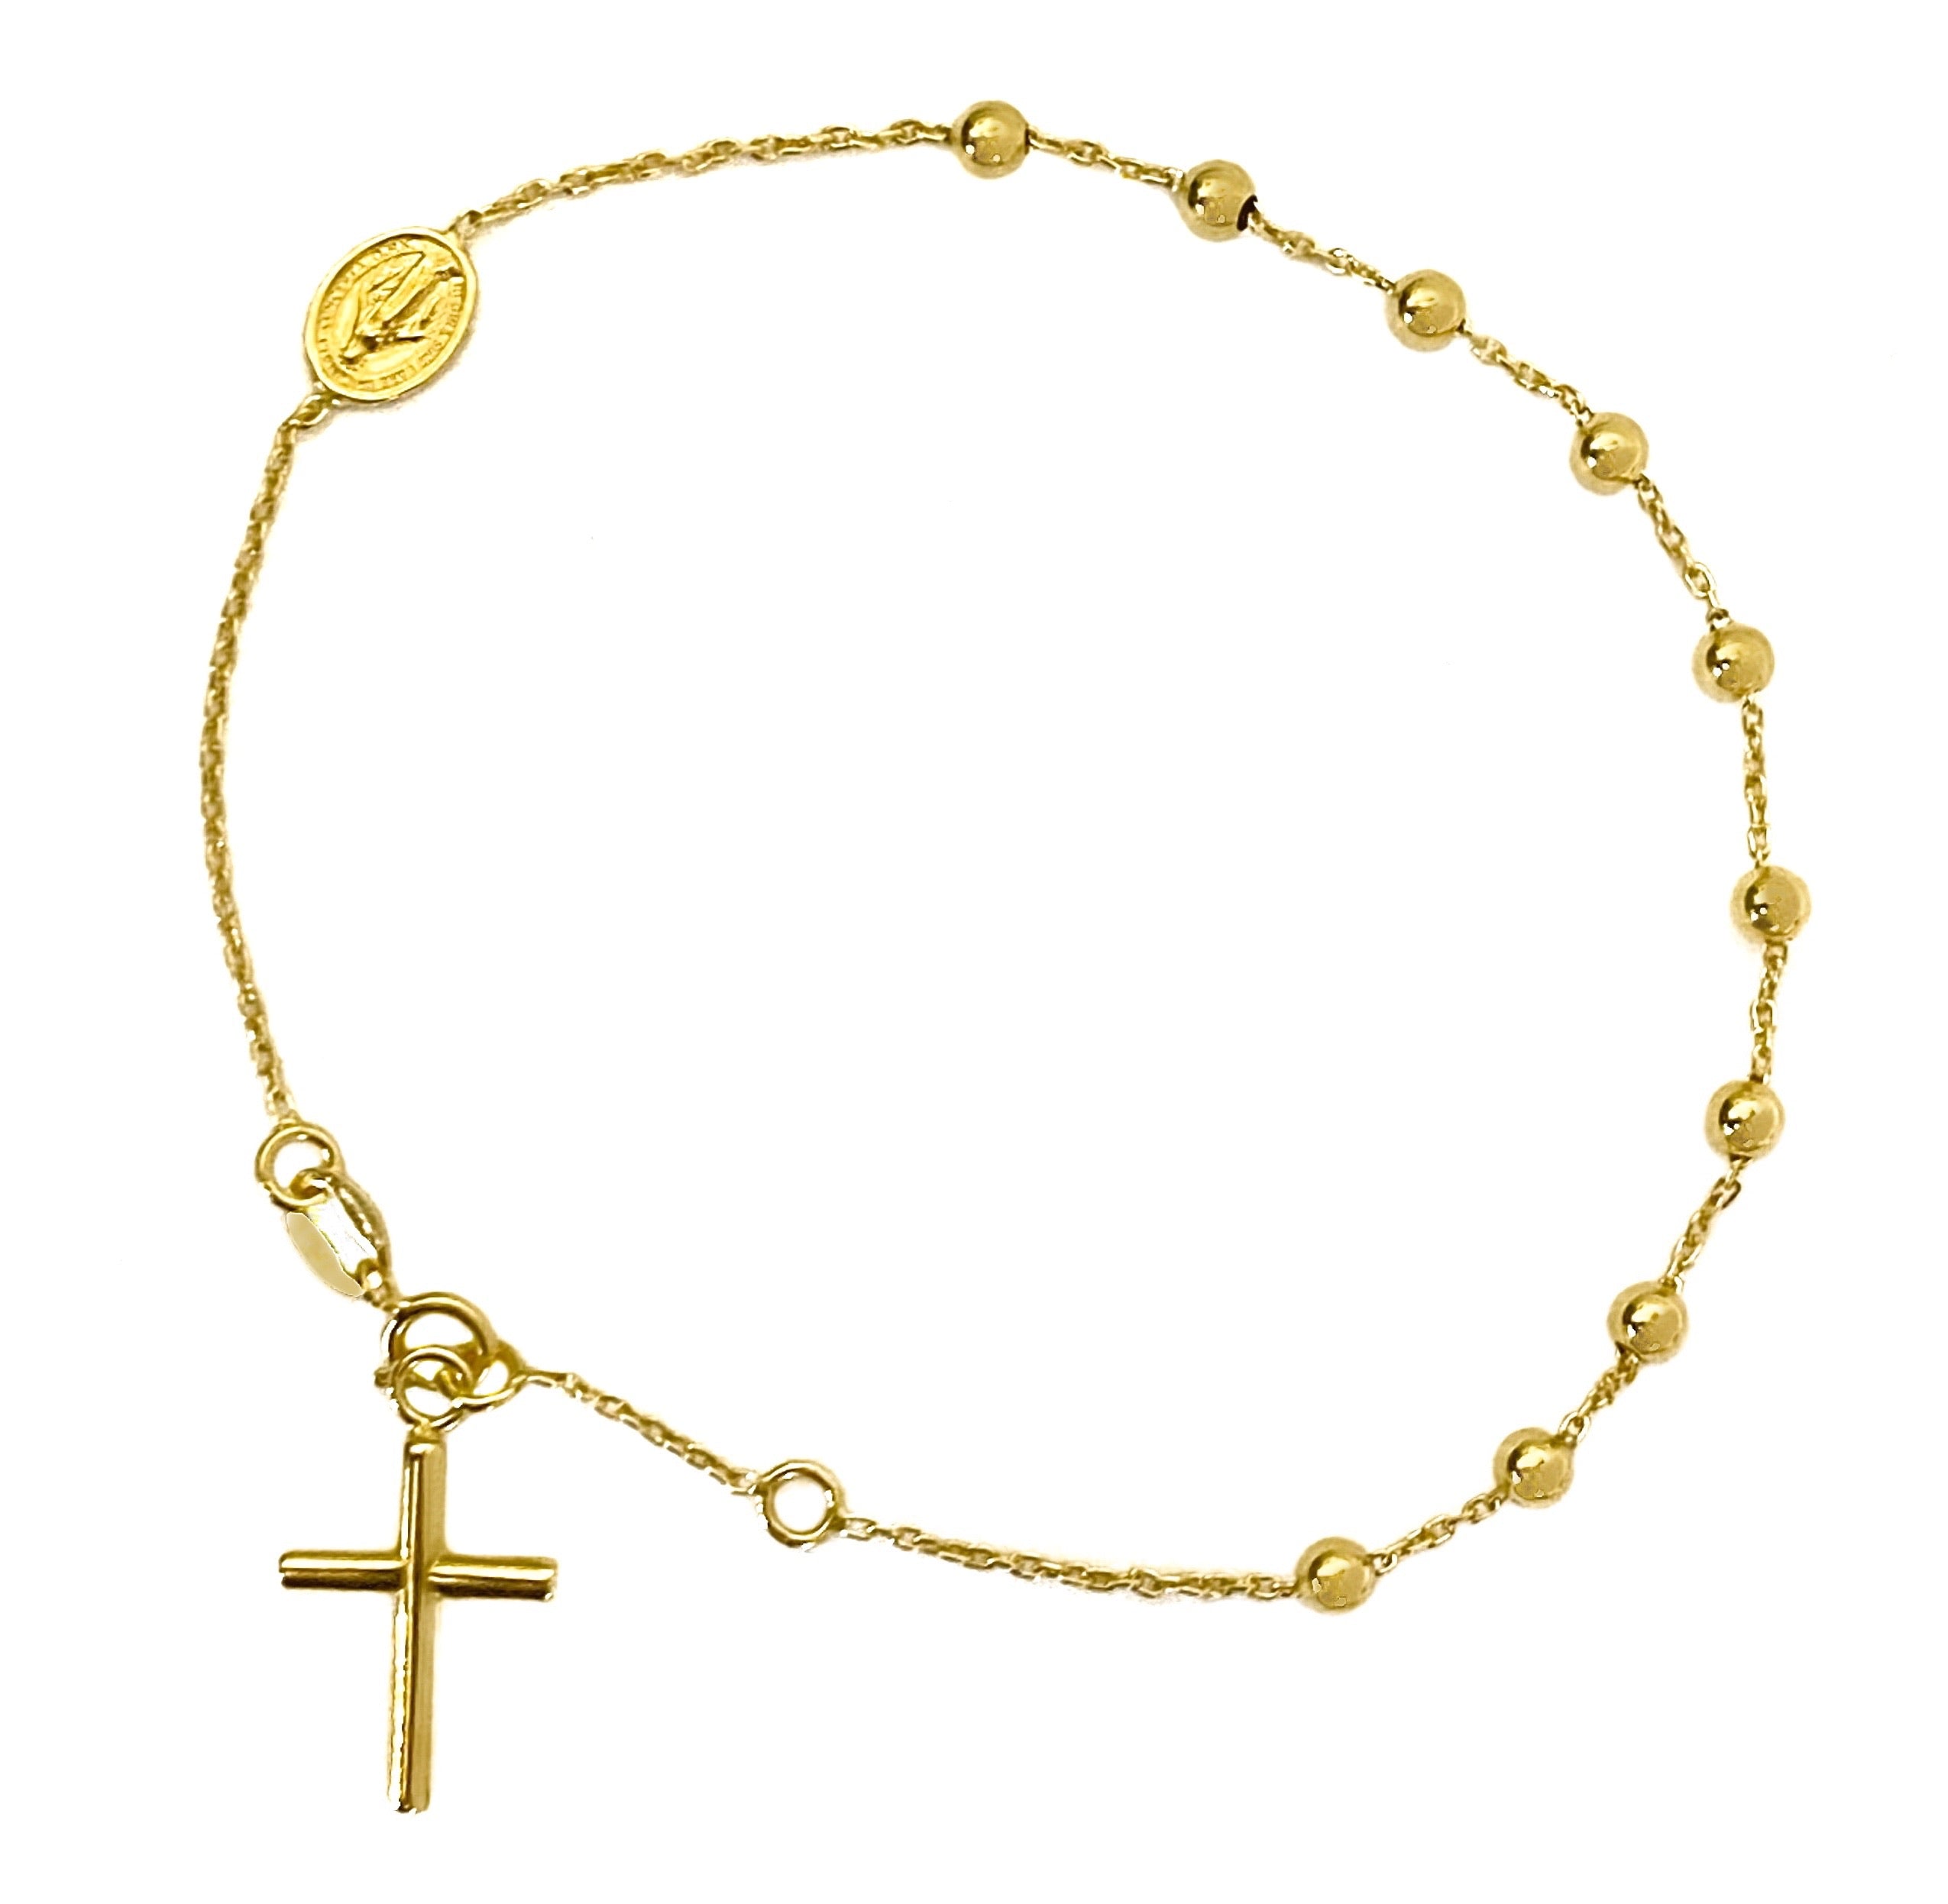 Christian Cross Rosary Bracelet With Silver And Gold Beads, Glass Pearl,  And Lobster Clasp Fashionable Religious Buddha Jewelry For Women And Men  From Yambags, $0.9 | DHgate.Com